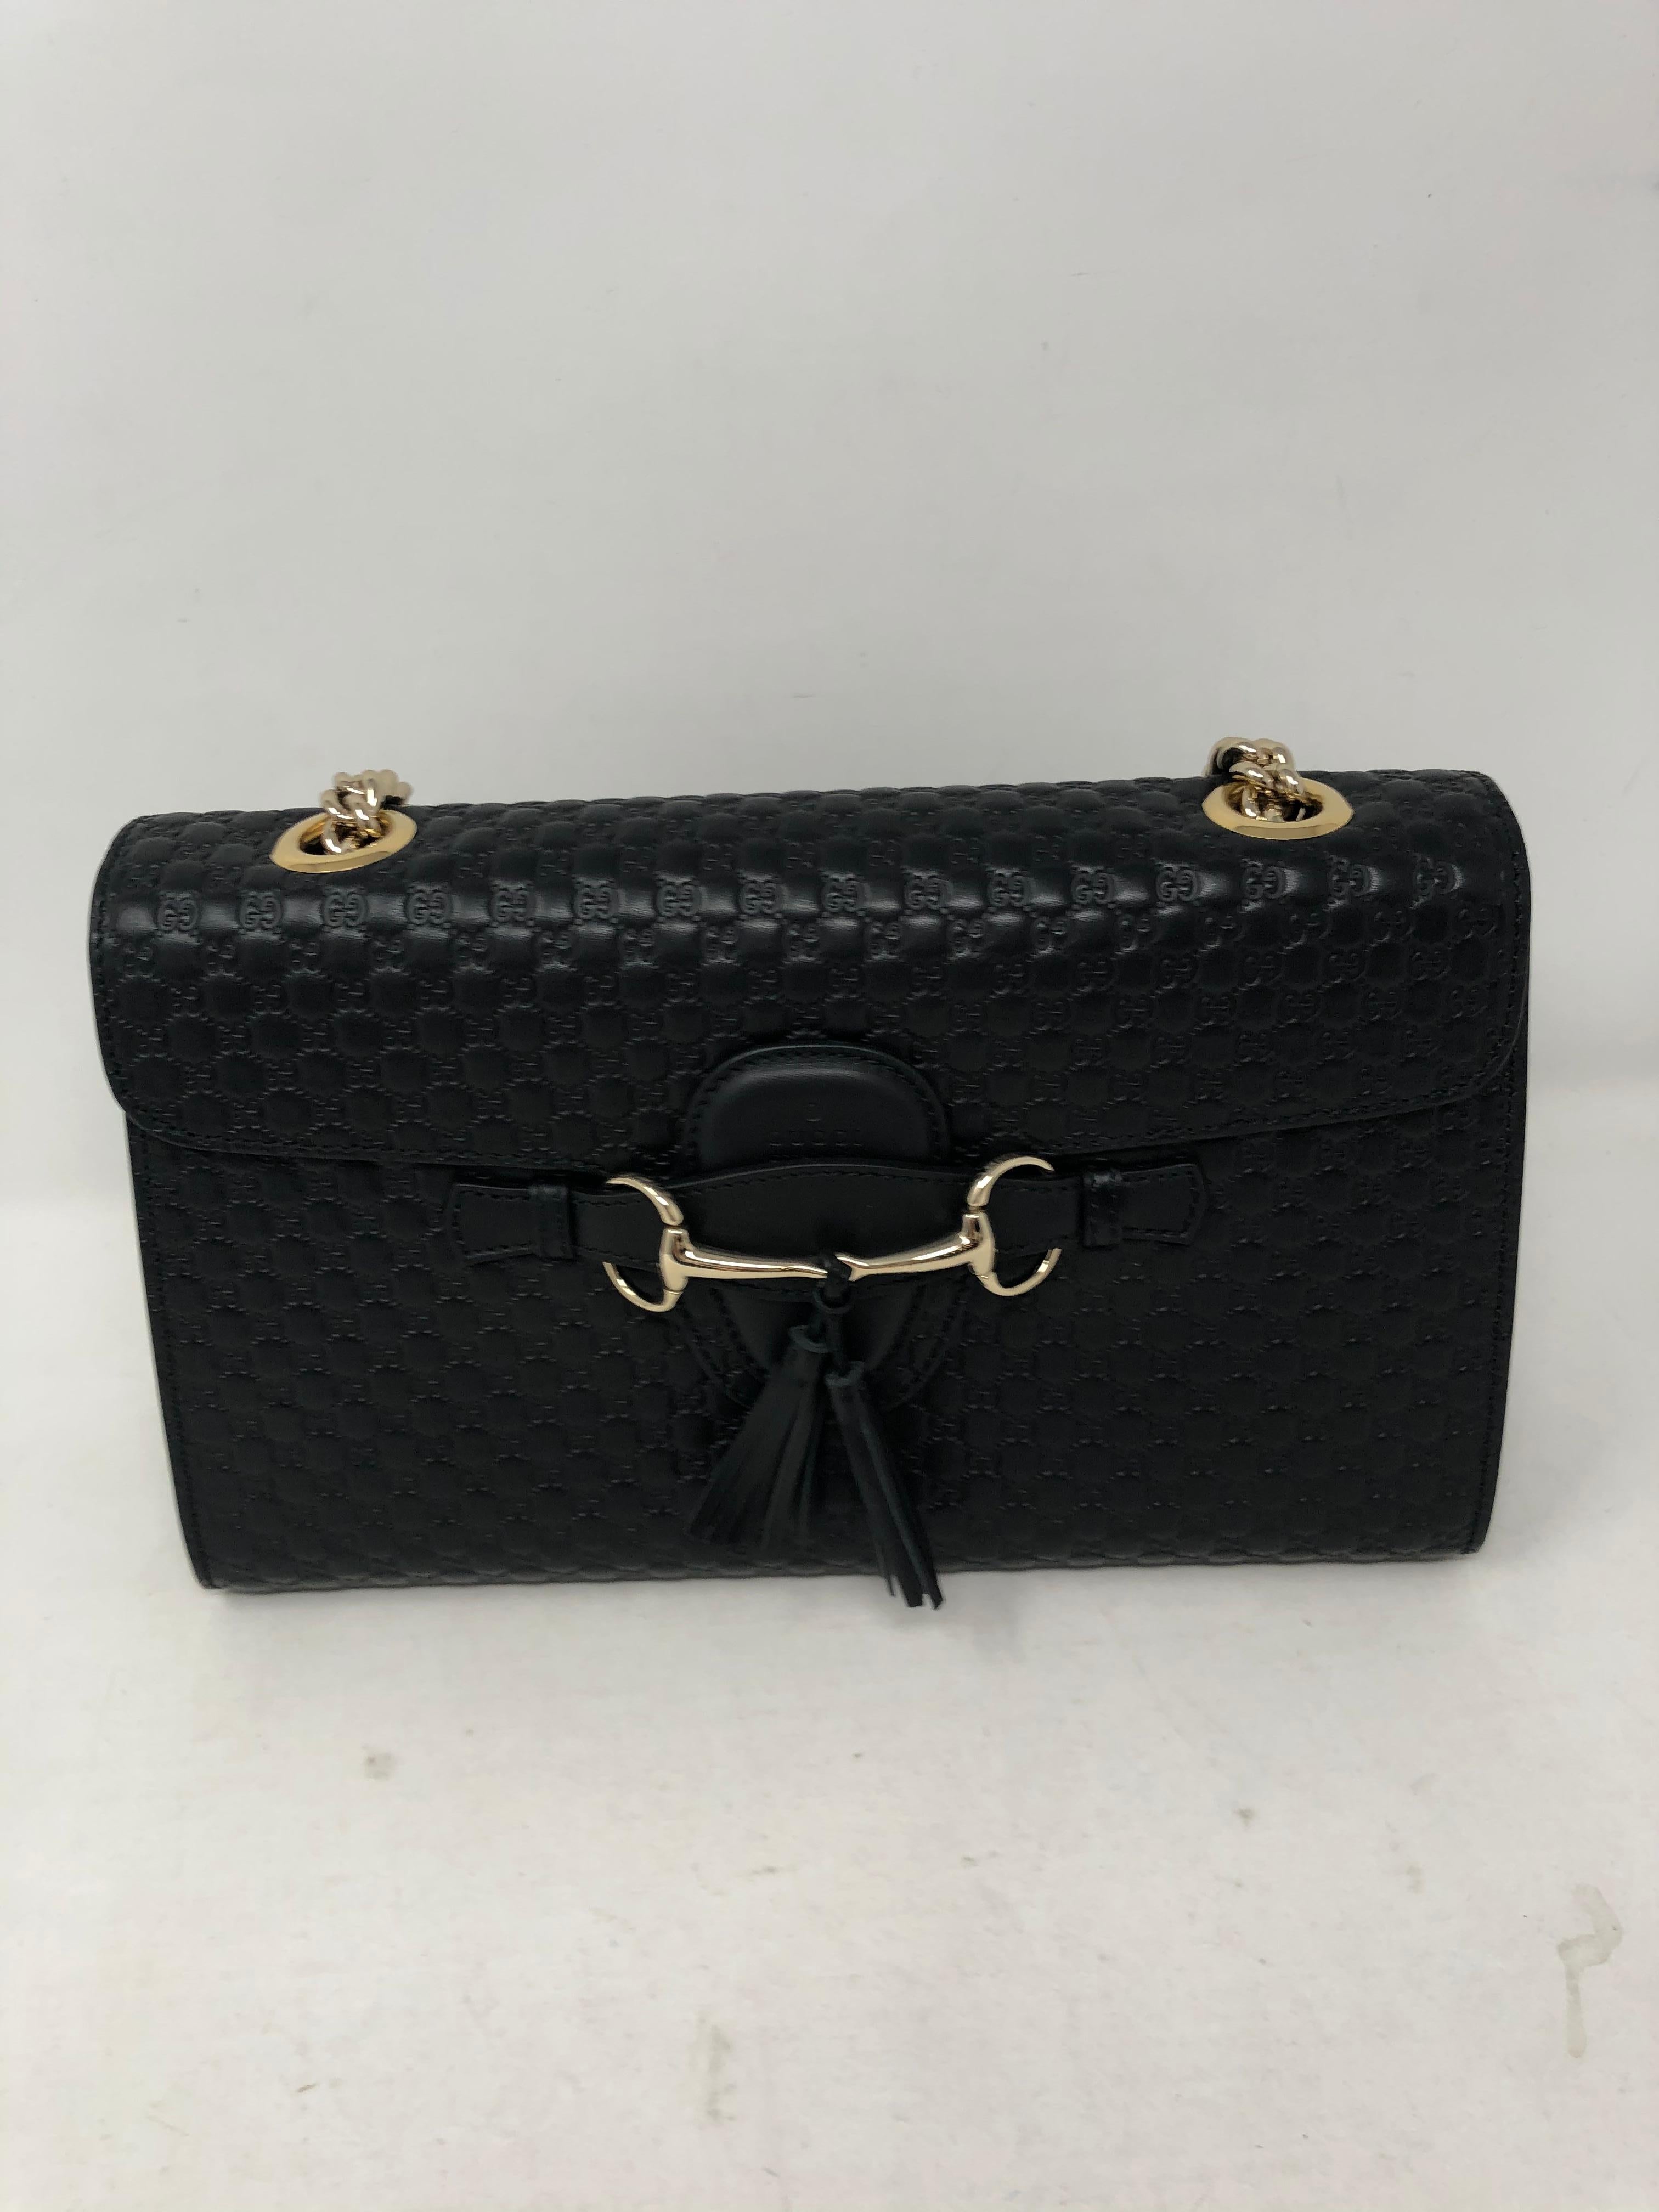 Gucci Embossed Black Leather Bag 4